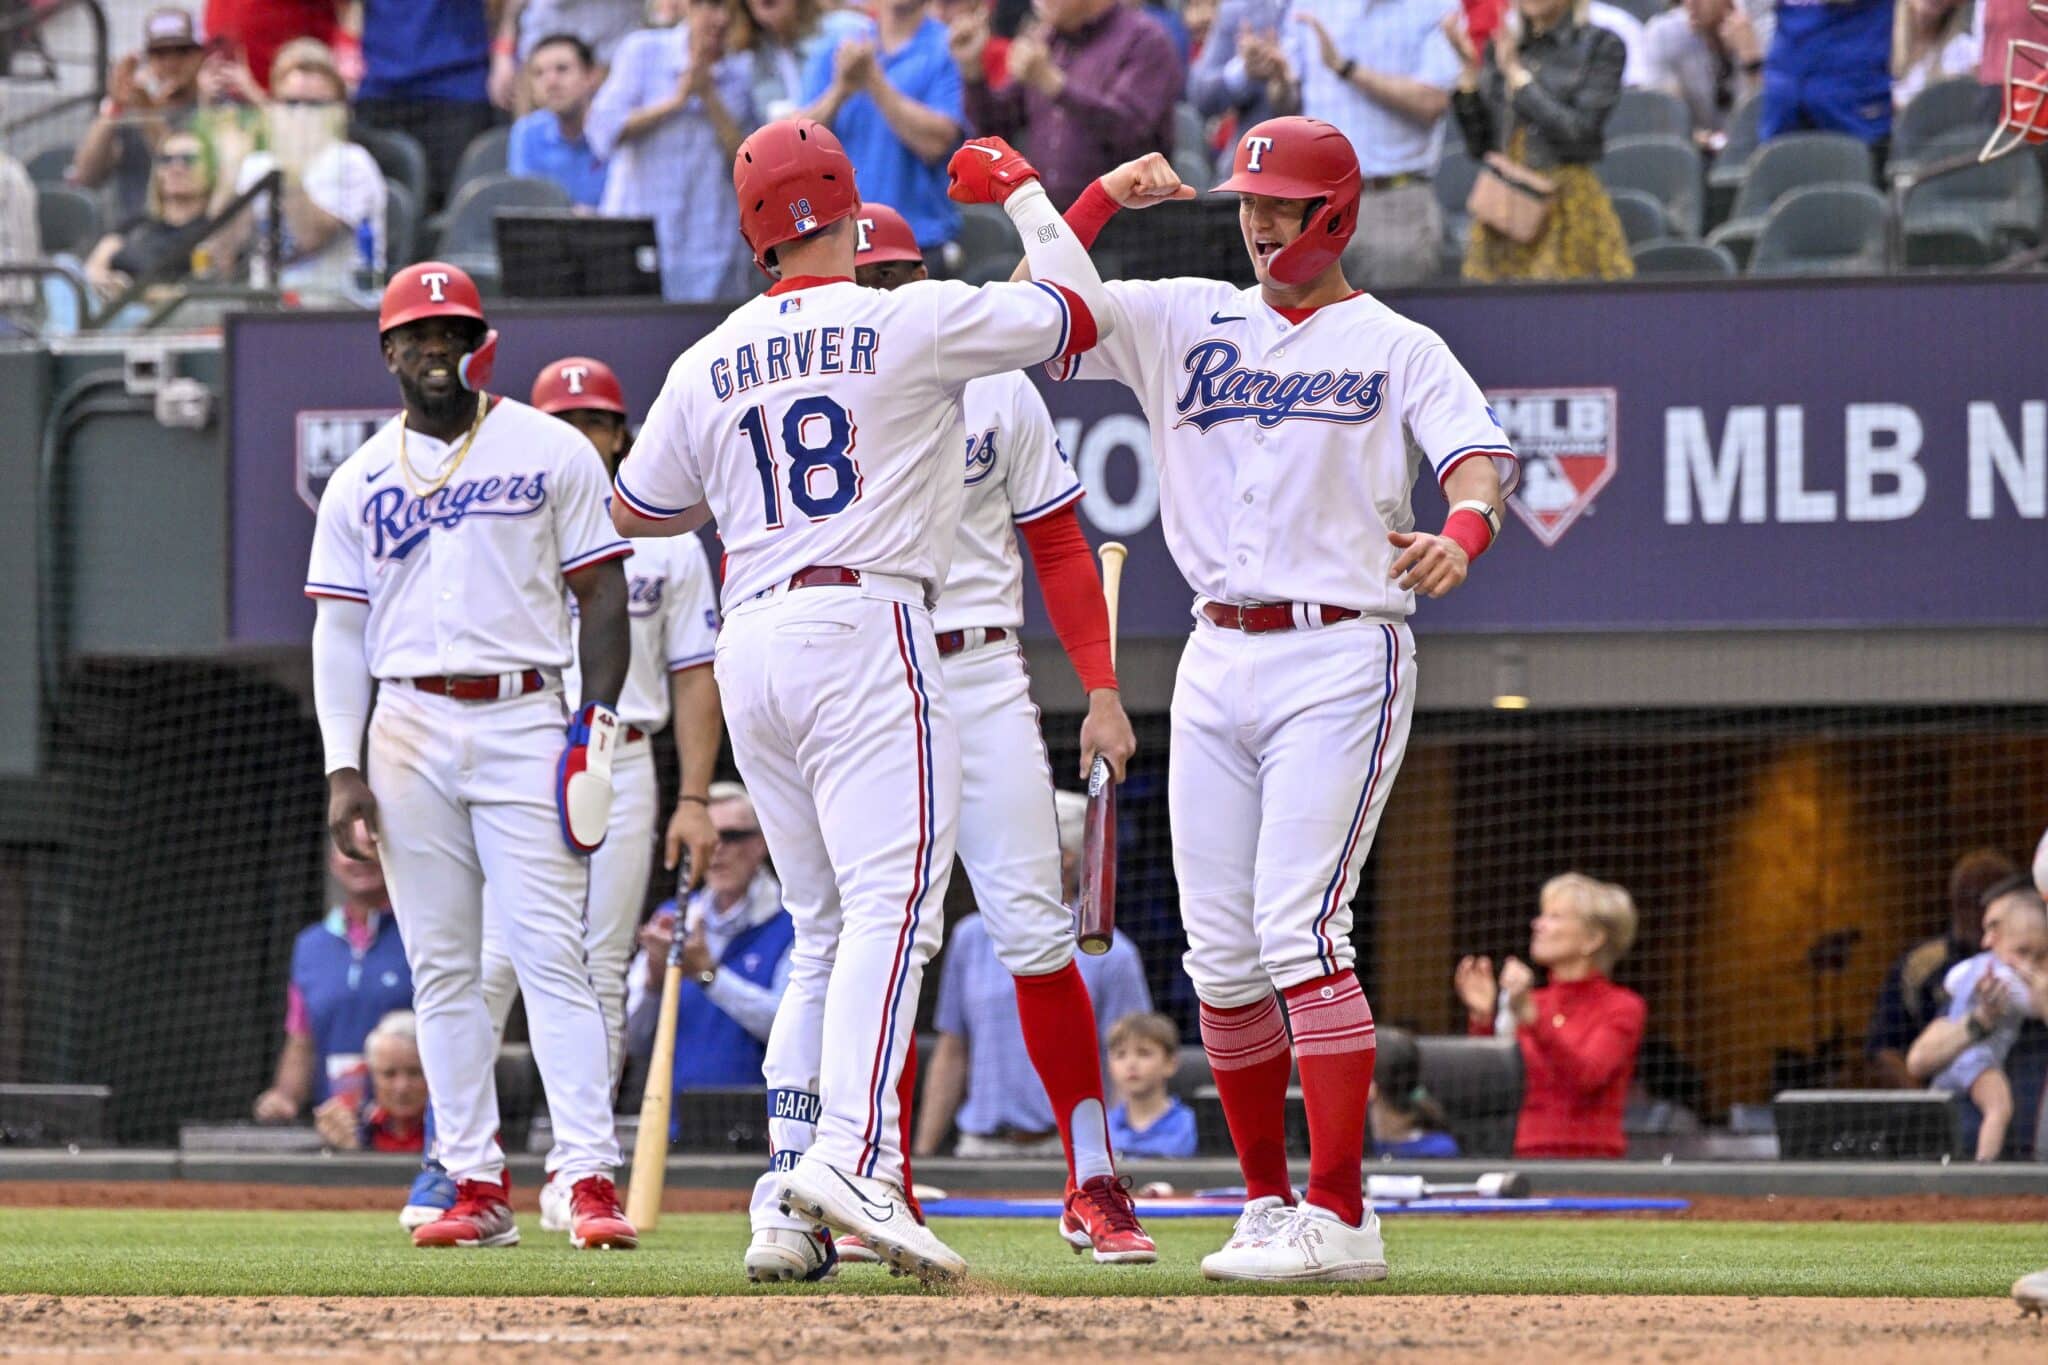 Texas Chainsaw Massacre: Thoughts After the Rangers Sweep the Phillies